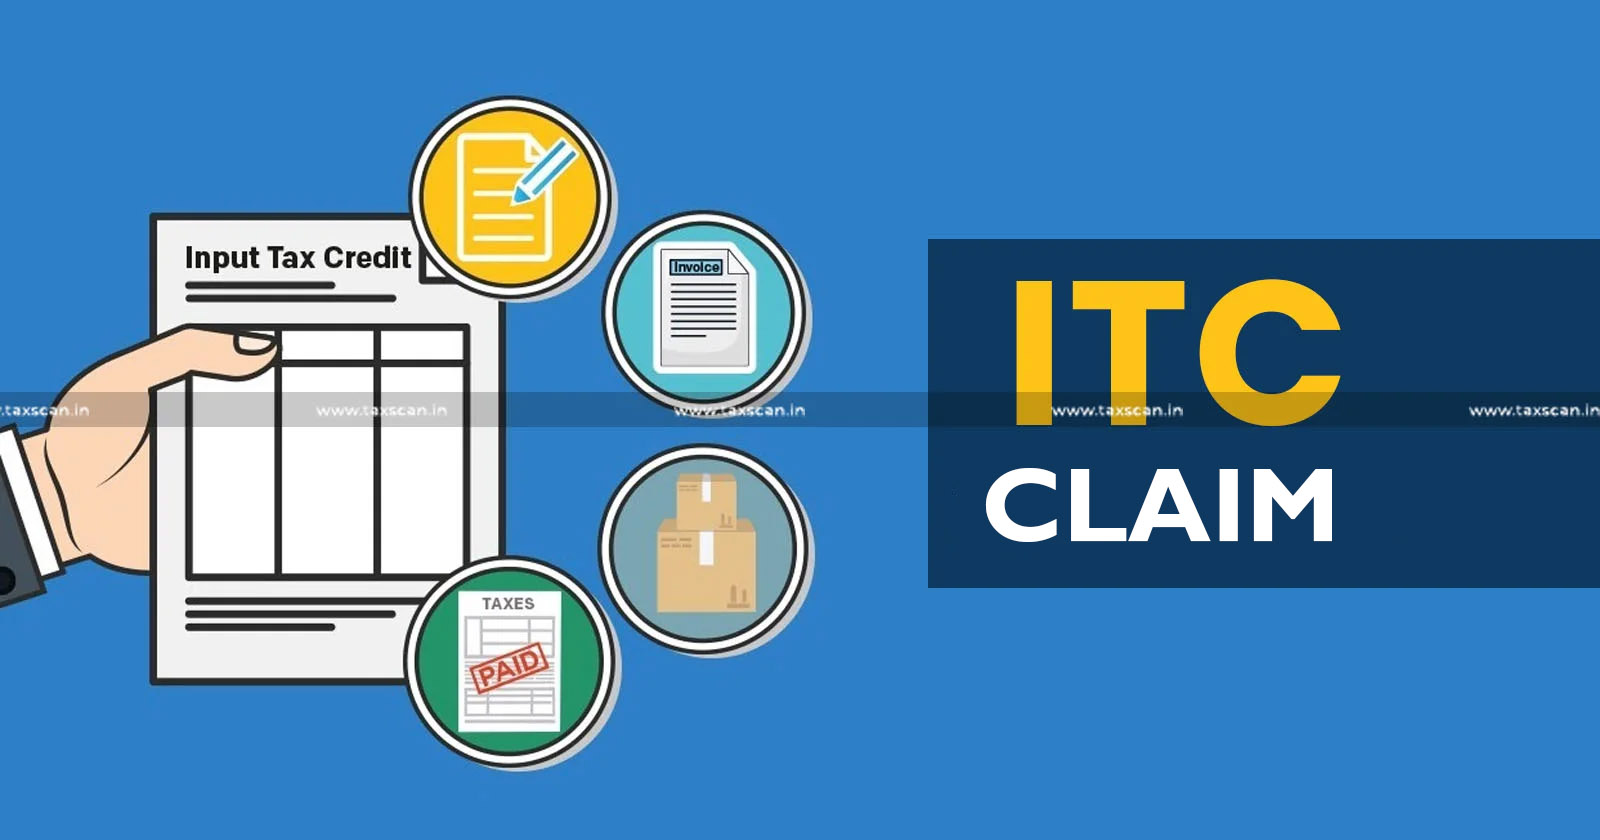 Time Limit on ITC Claim - Time Limit - ITC Claim - ITC - Claim - CGST Act - CGST - Deemed Constitutional - Articles 14 - Andhra Pradesh High Court - Taxscan